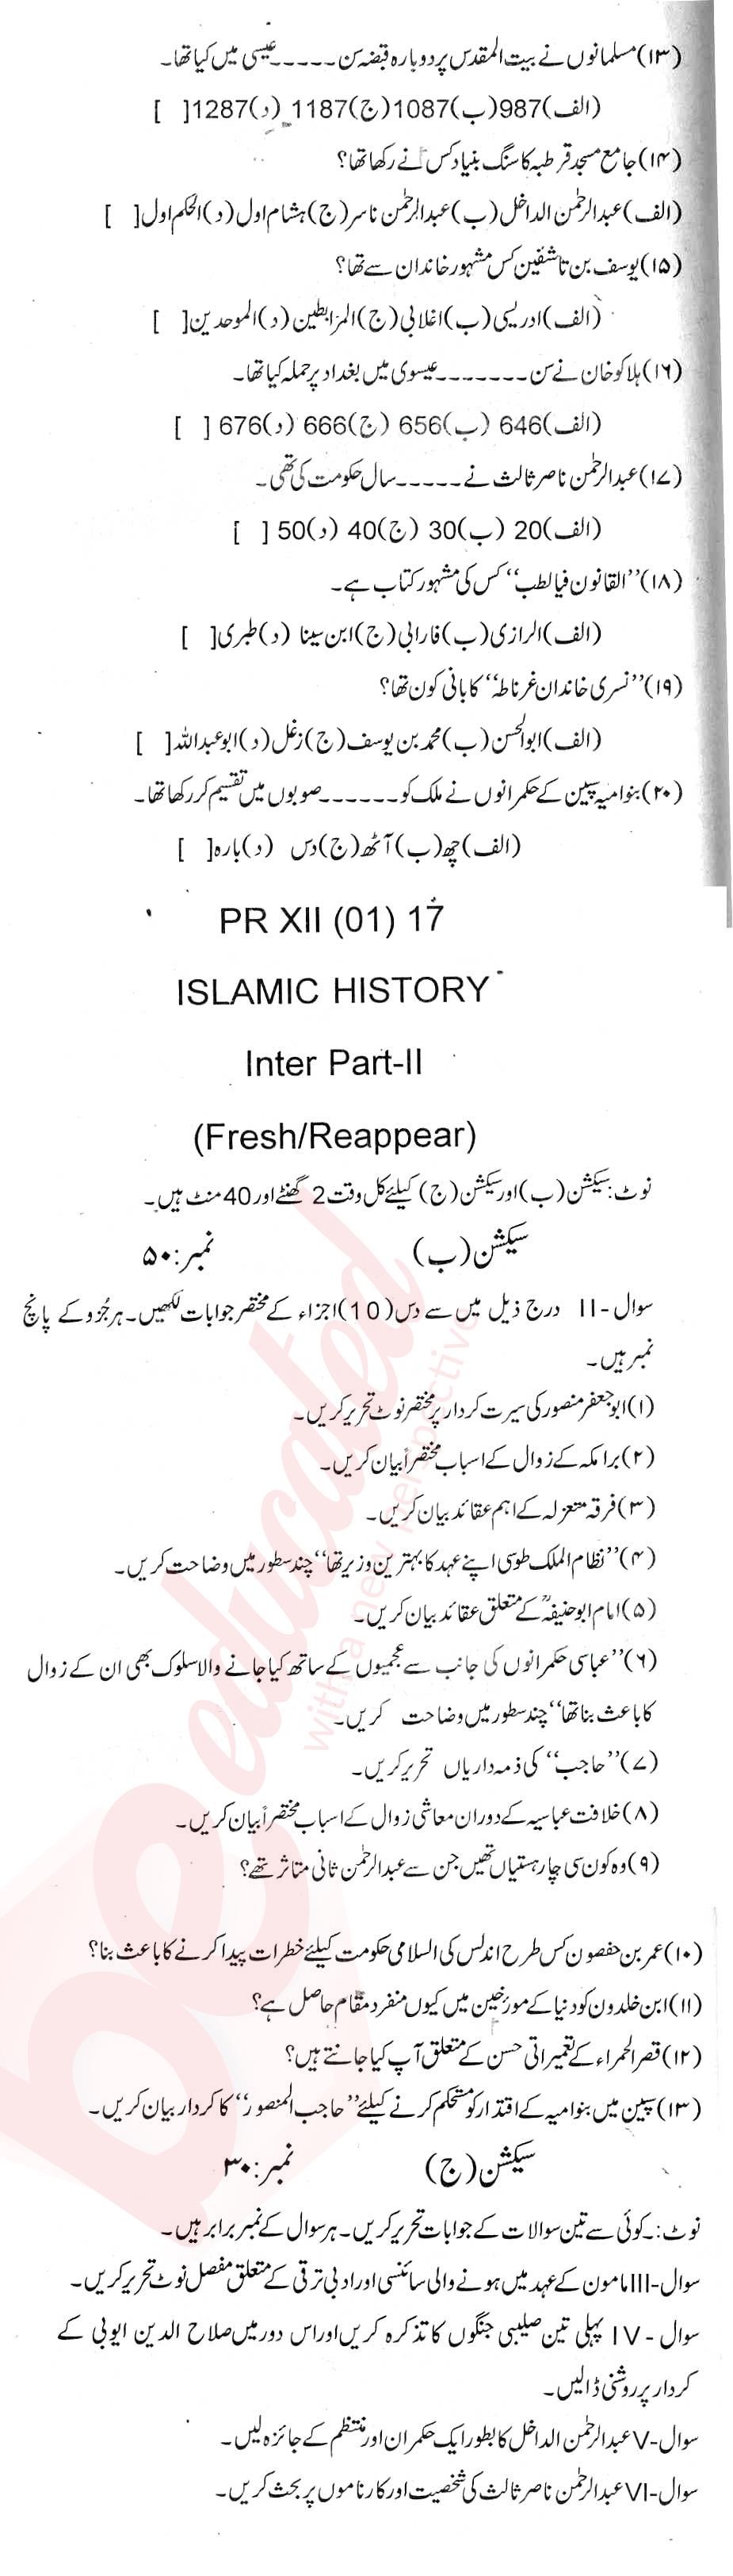 Islamic History FA Part 2 Past Paper Group 1 BISE Bannu 2017